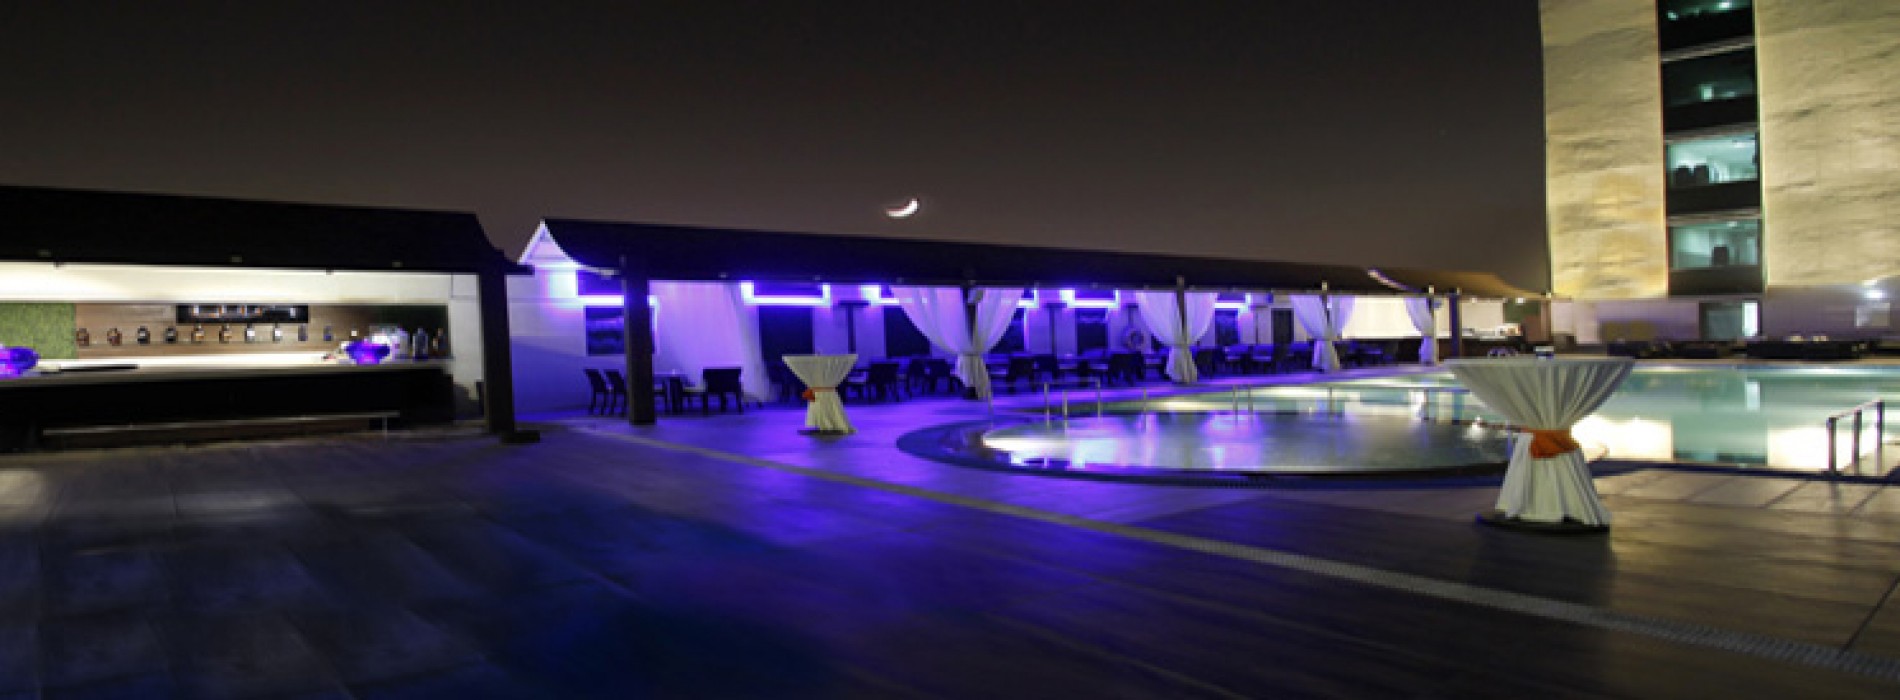 Radisson Blu Hotel Ghaziabad opens Lust by Poolside Bar & Barbeque